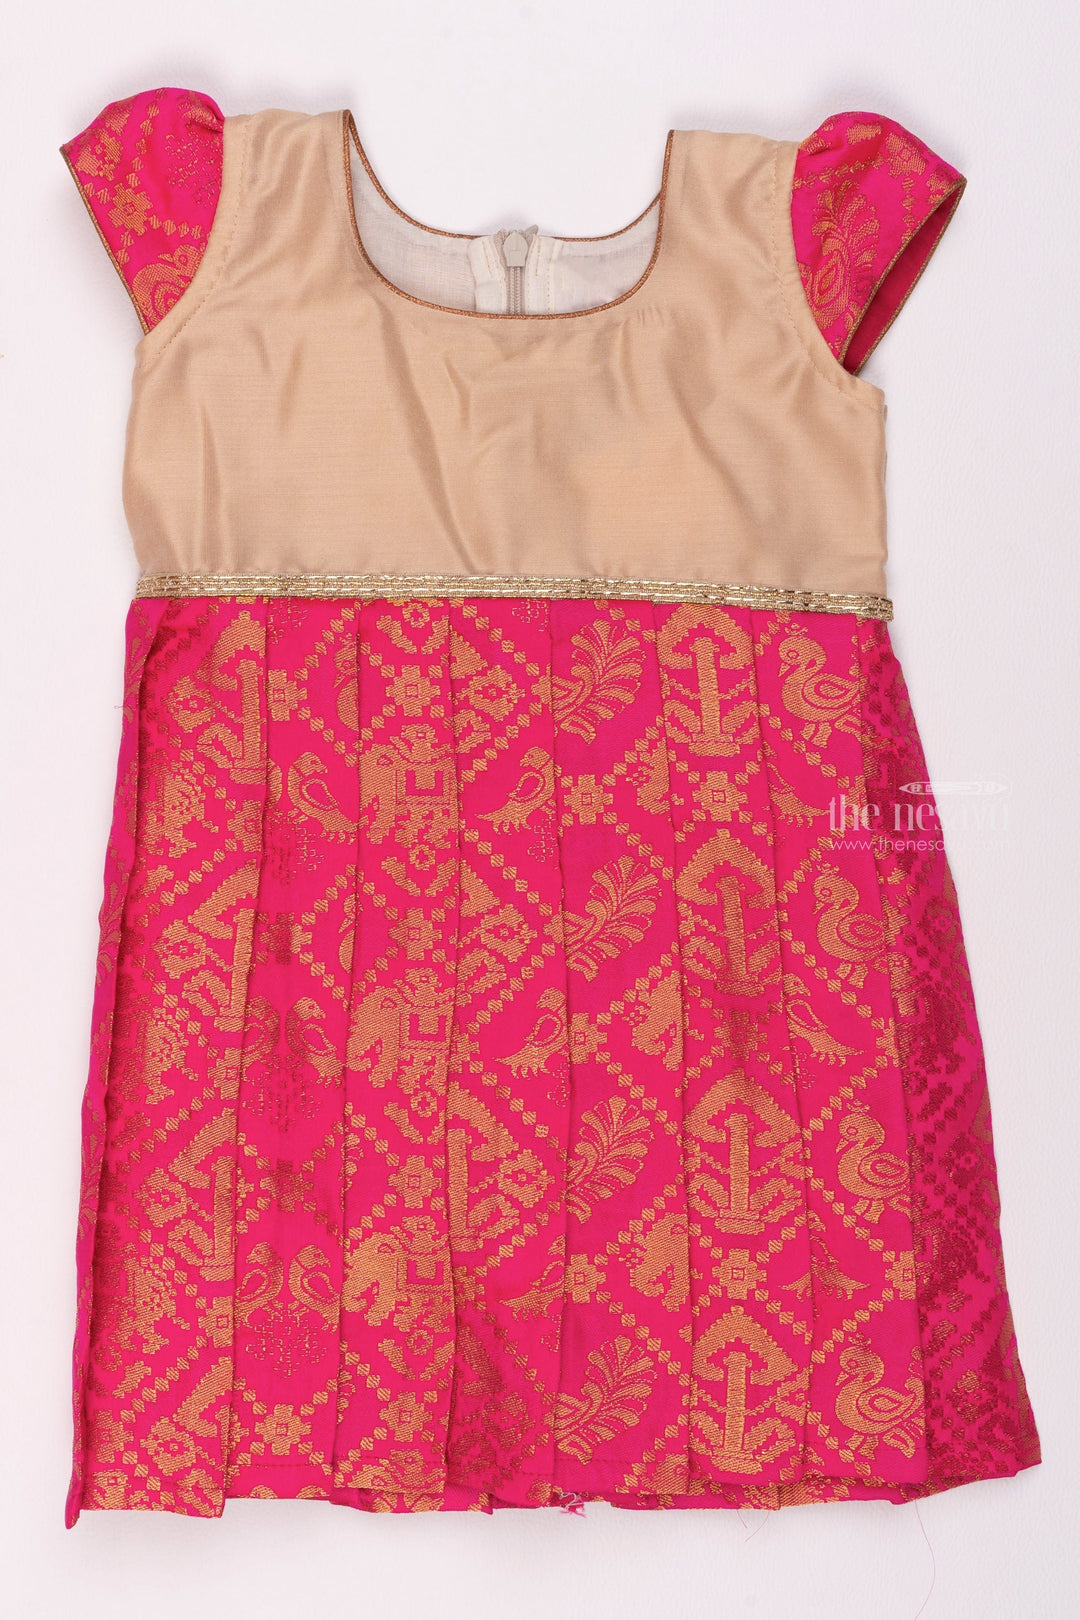 The Nesavu Silk Frock Exotic Animal Motif in Pink Pleats with Neutral Beige Yoke: Wild and Elegant for Young Ladies Nesavu 16 (1Y) / Pink / Banarasi SF706-16 Baby Ethnic Frock | Pattu Frock for Baby Girls | The Nesavu